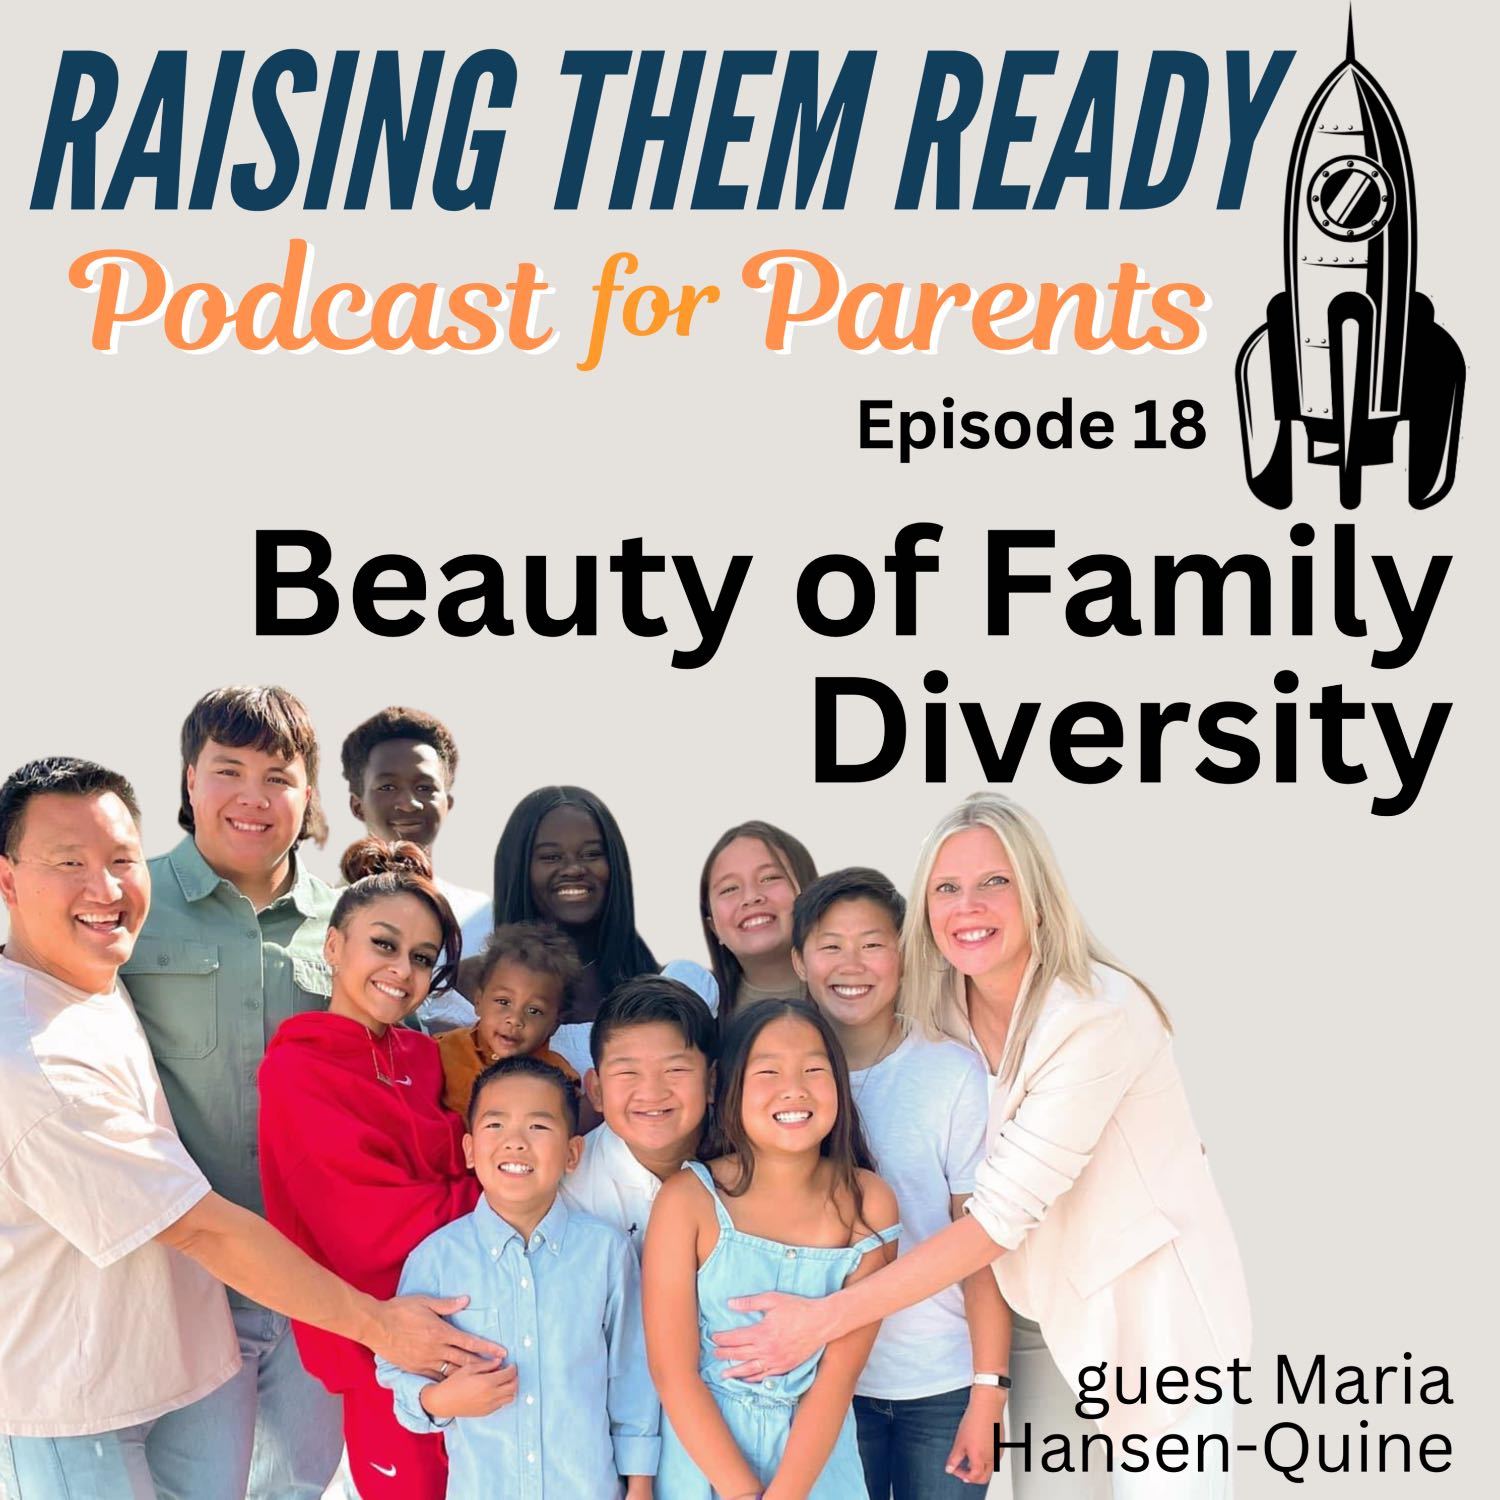 Beauty of Family Diversity, with guest Maria Hansen-Quine